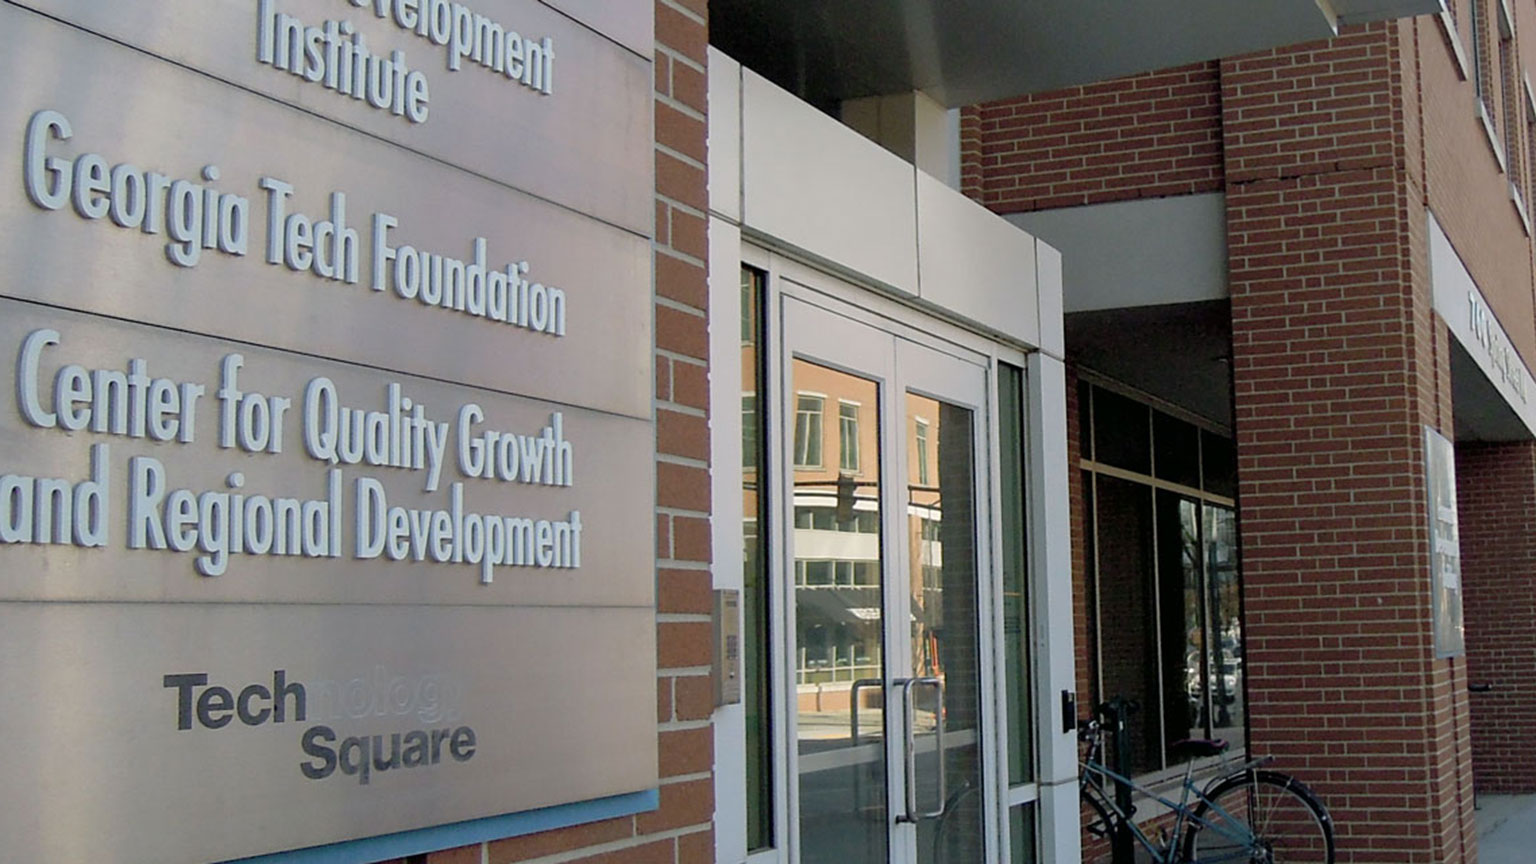 A photo of the front door of 760 Spring Street, adjacent to Tech Square.